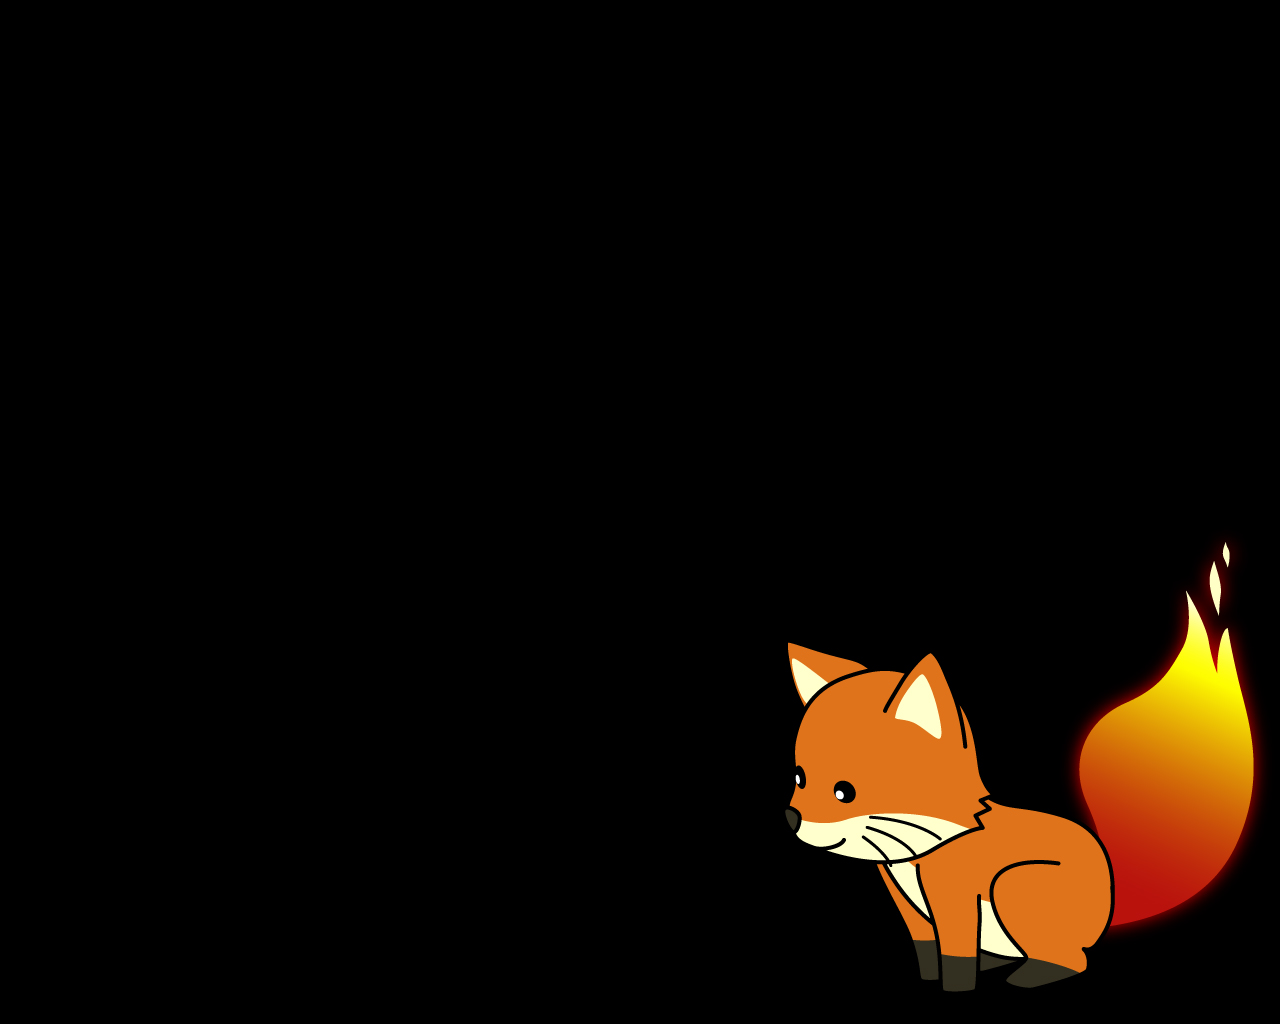 Cool Fox Wallpaper Black Cartoon Tail Darkness Cat Whiskers Red